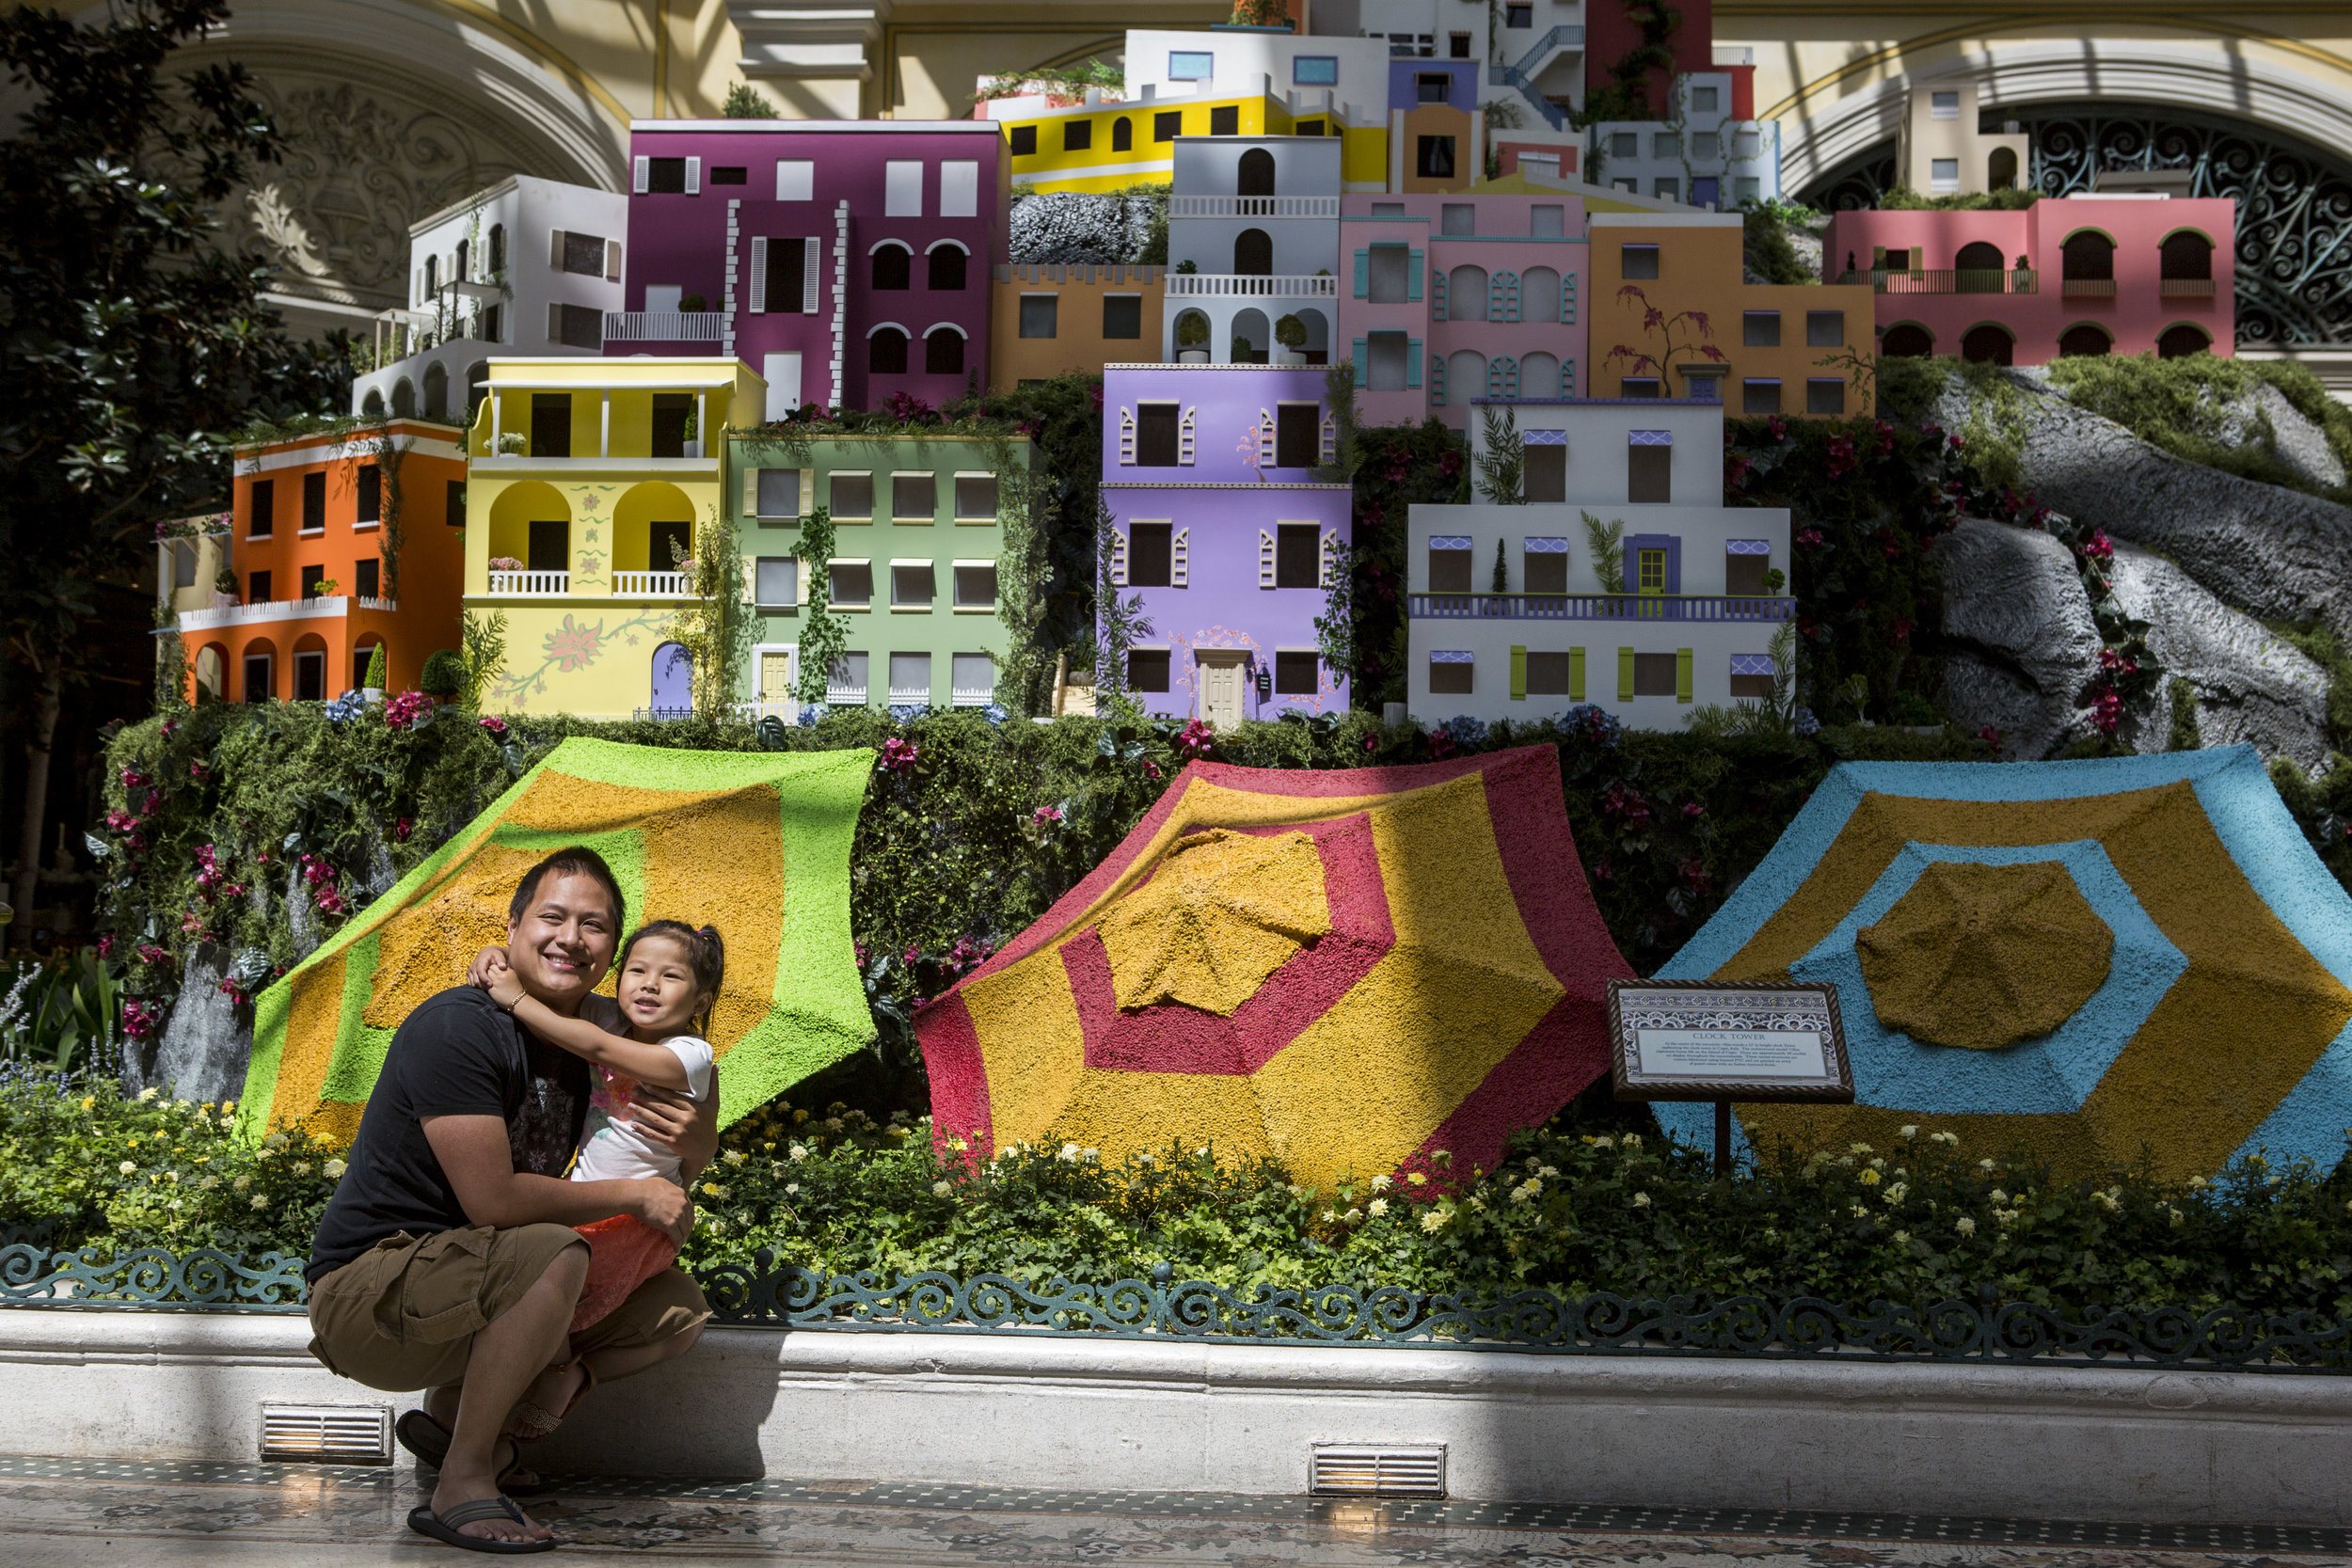  Kenny Nguyen and his daughter Serena, 4, of Garden Grove, California, take a photo together during the opening of the new Italian-inspired display in the Bellagio's conesrvatory on Monday, June 12, 2017.  Patrick Connolly Las Vegas Review-Journal @P